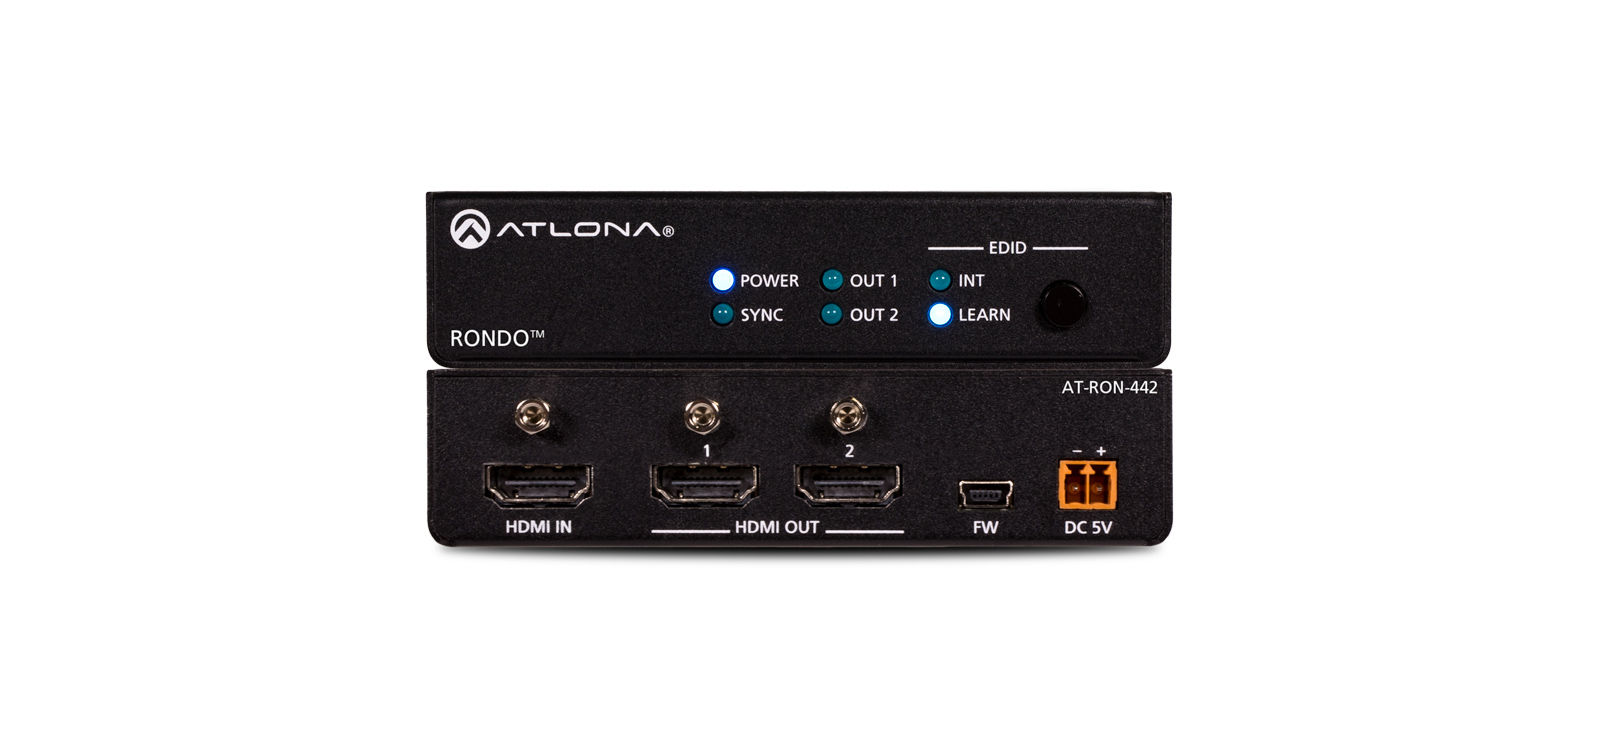 Photos - Other Video Equipment Atlona Rondo 442 Active video converter 4096 x 2160 pixels AT-RON-442 